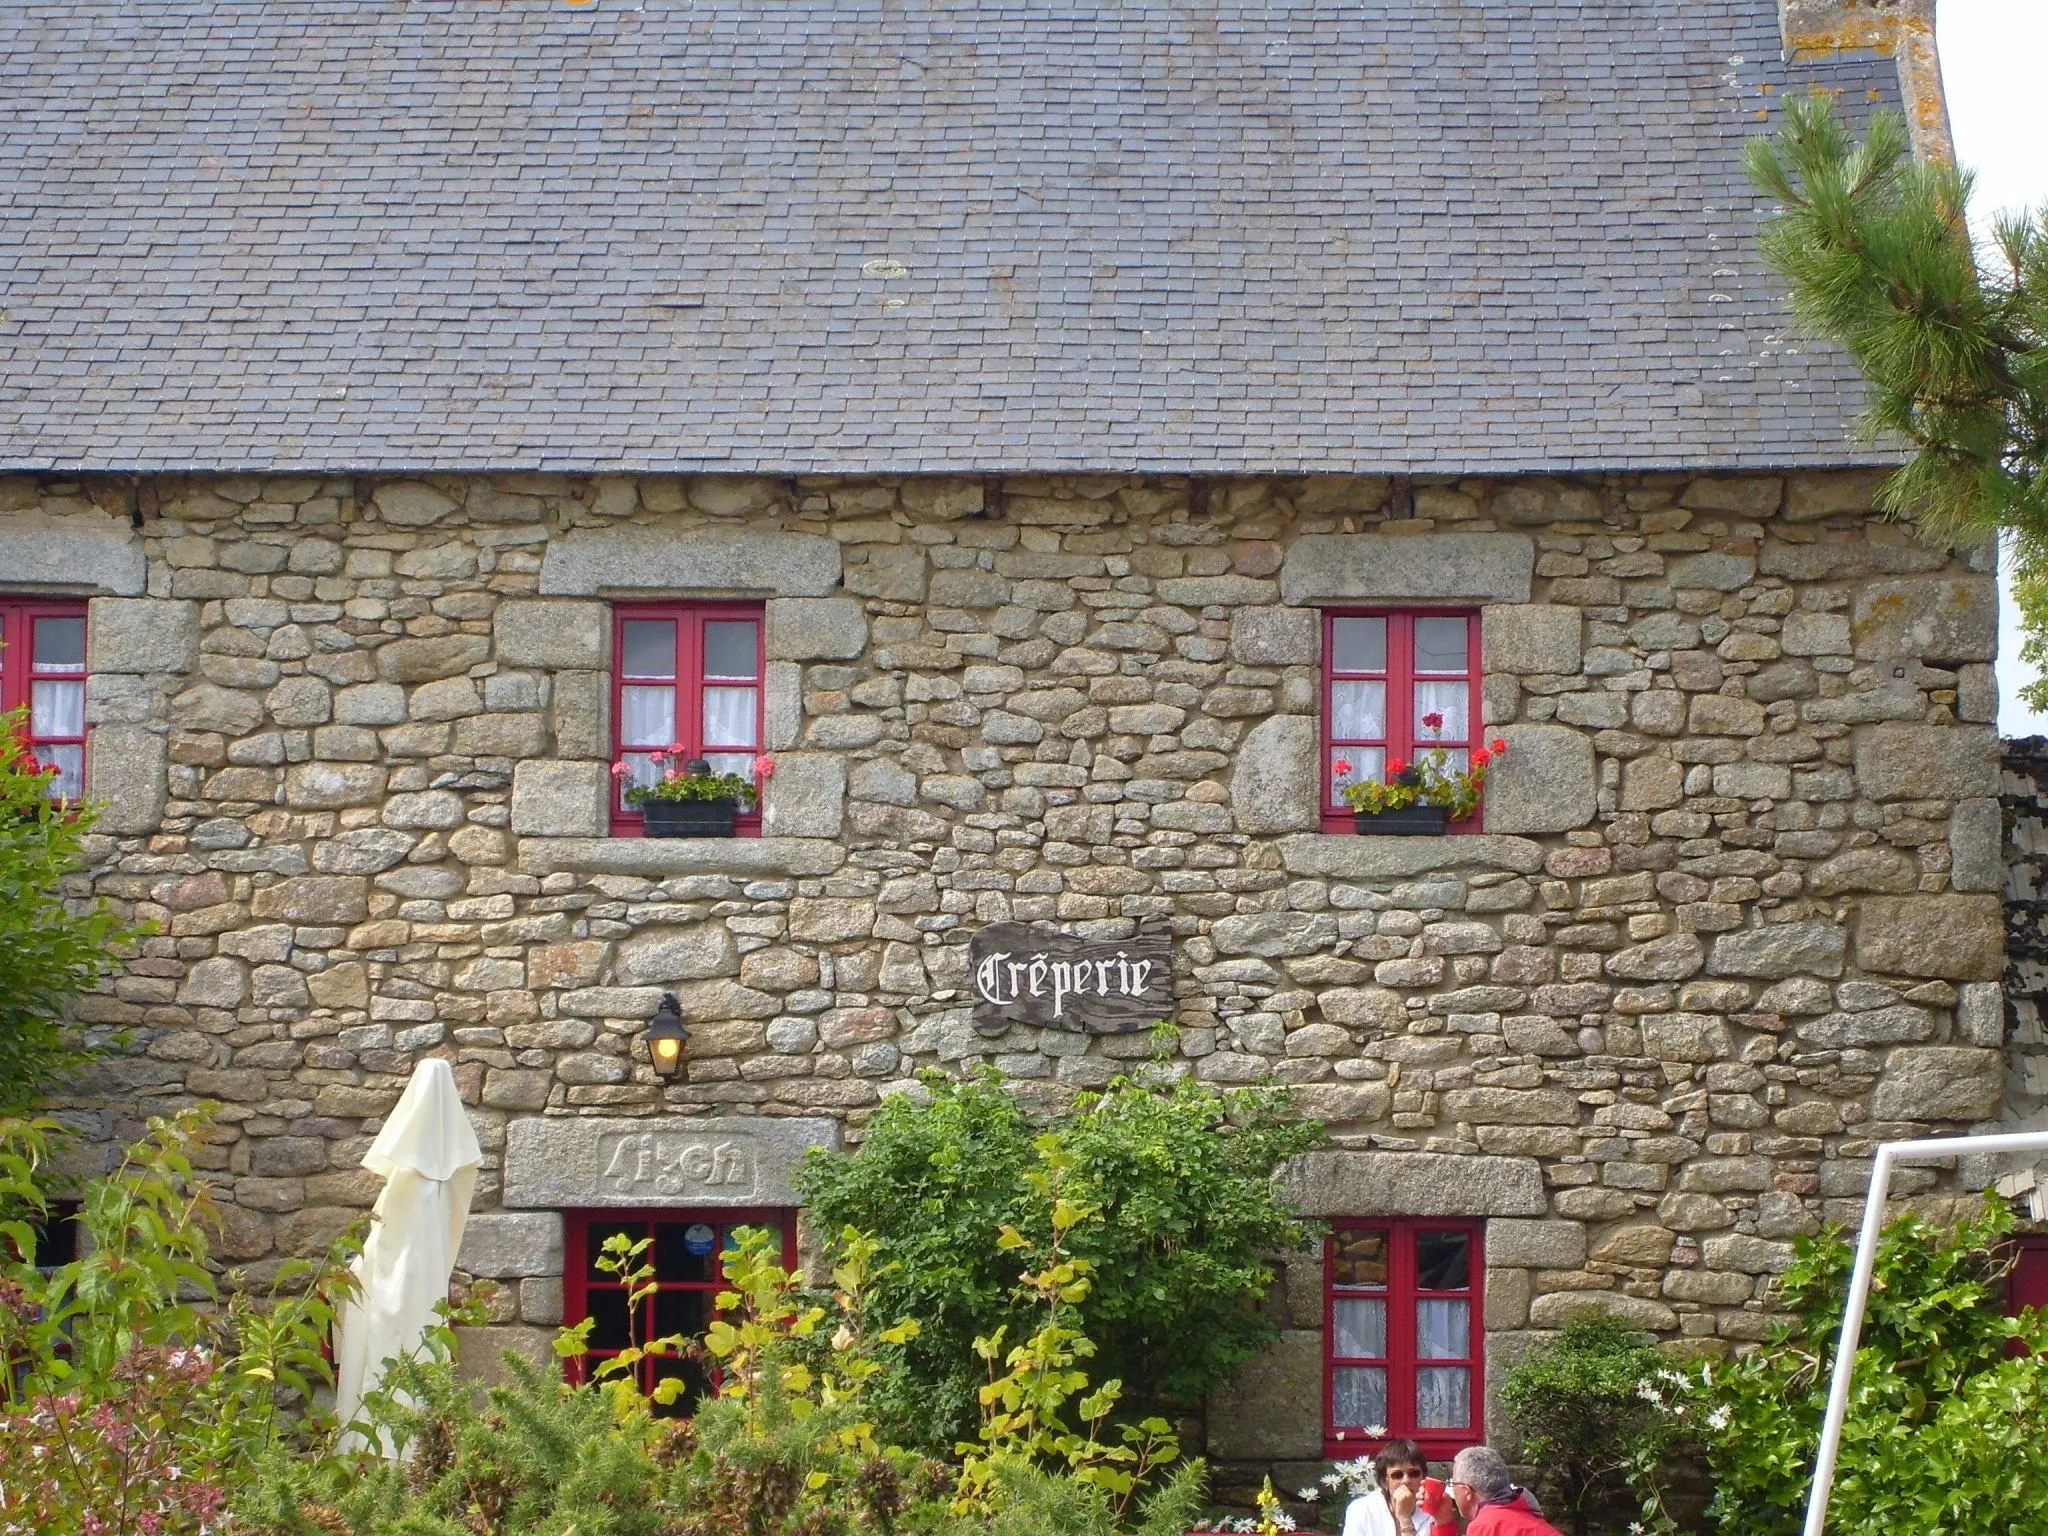 Photo showing: Crêperie le Lizen at Kergoff, Plouguerneau, Bretagne. Image title: Traditional wooden windows on house
Image from Public domain images website, http://www.public-domain-image.com/full-image/objects-public-domain-images-pictures/doors-and-windows-public-domain-images-pictures/traditional-wooden-windows-on-house.jpg.html